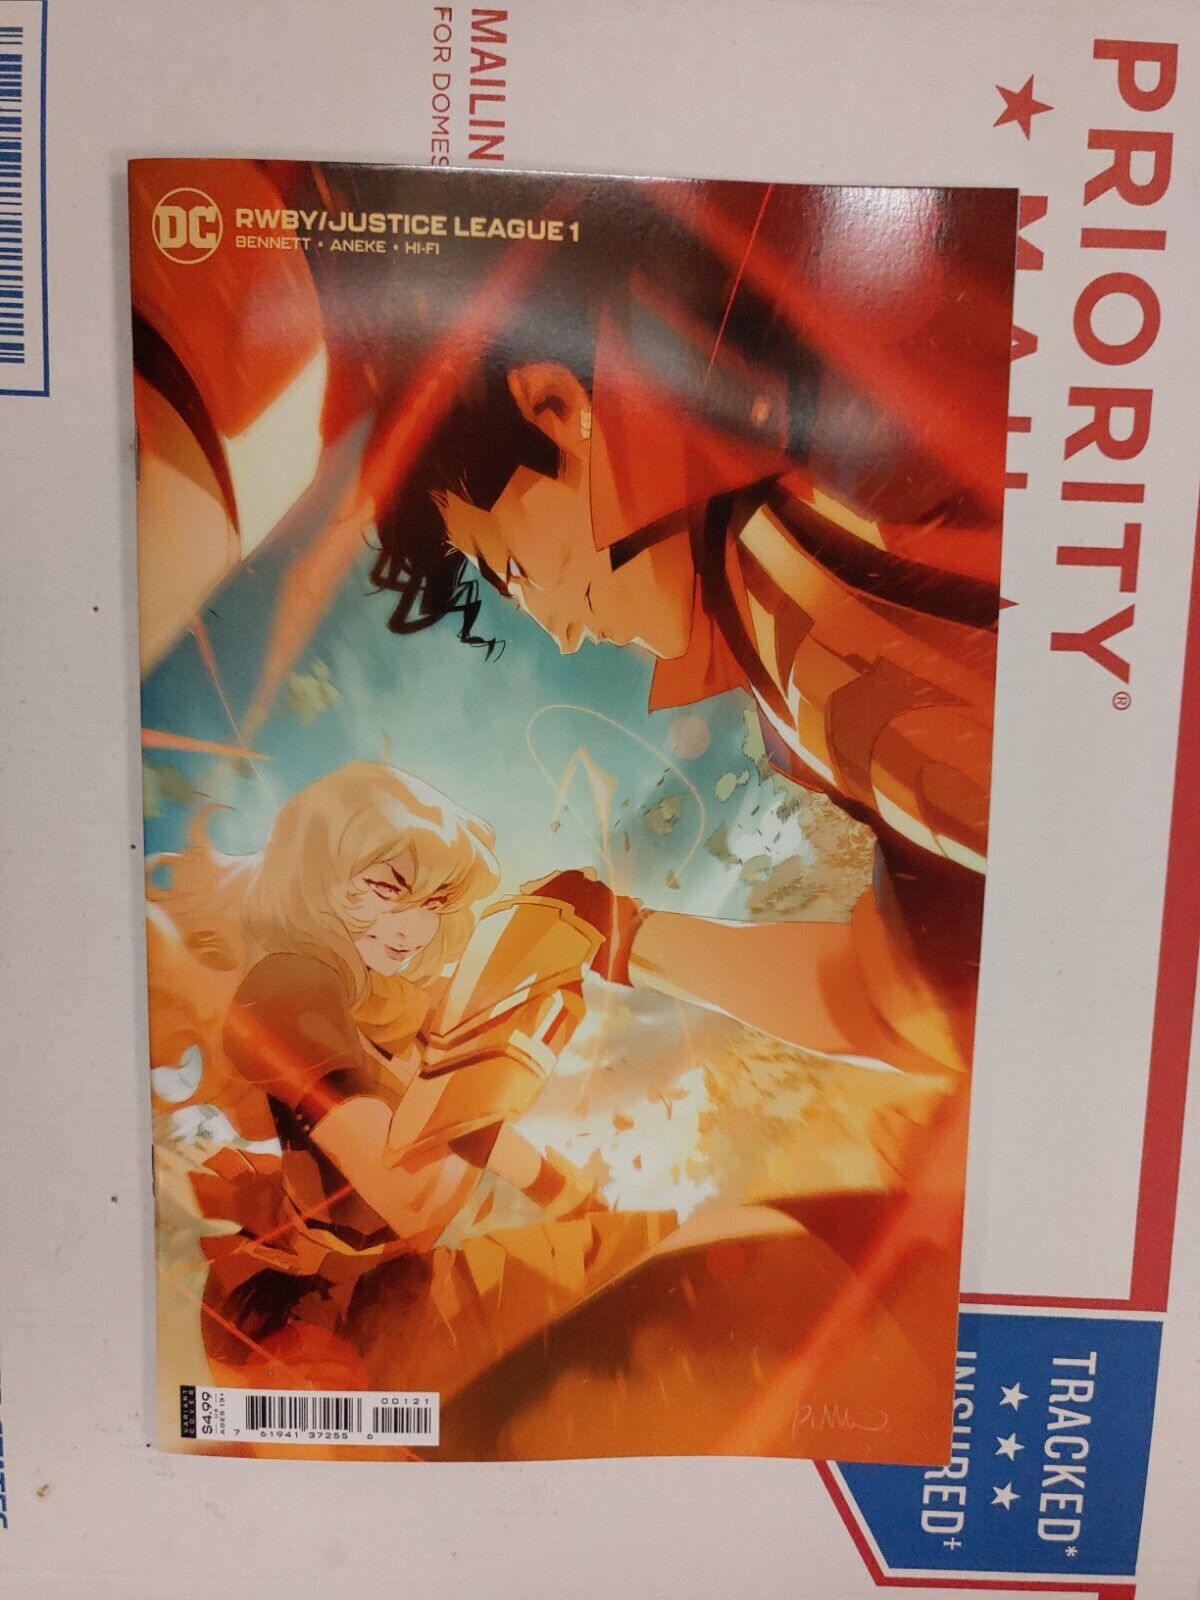 RWBY Justice League #1 Simone Di Meo Card Stock Variant  NM OR BETTER